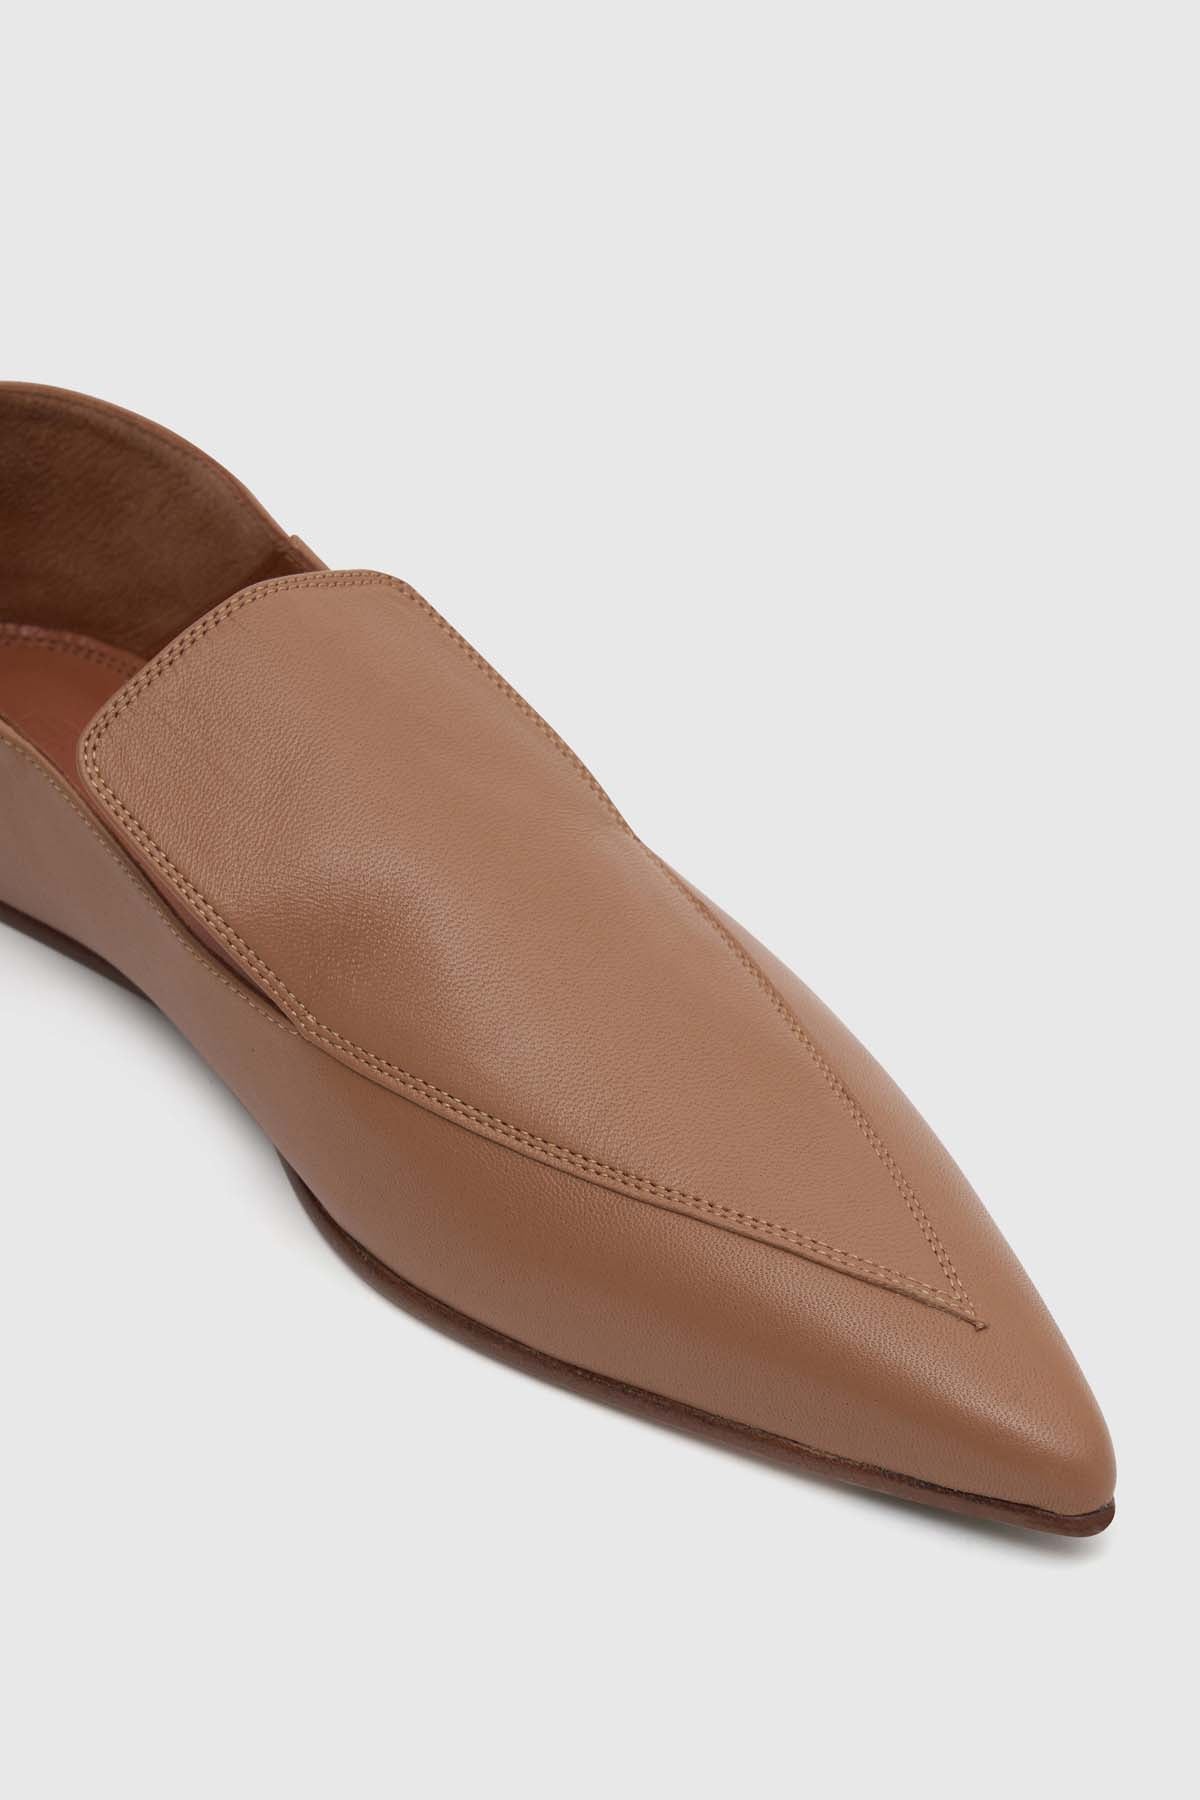 Kai Leather Loafer - Beige